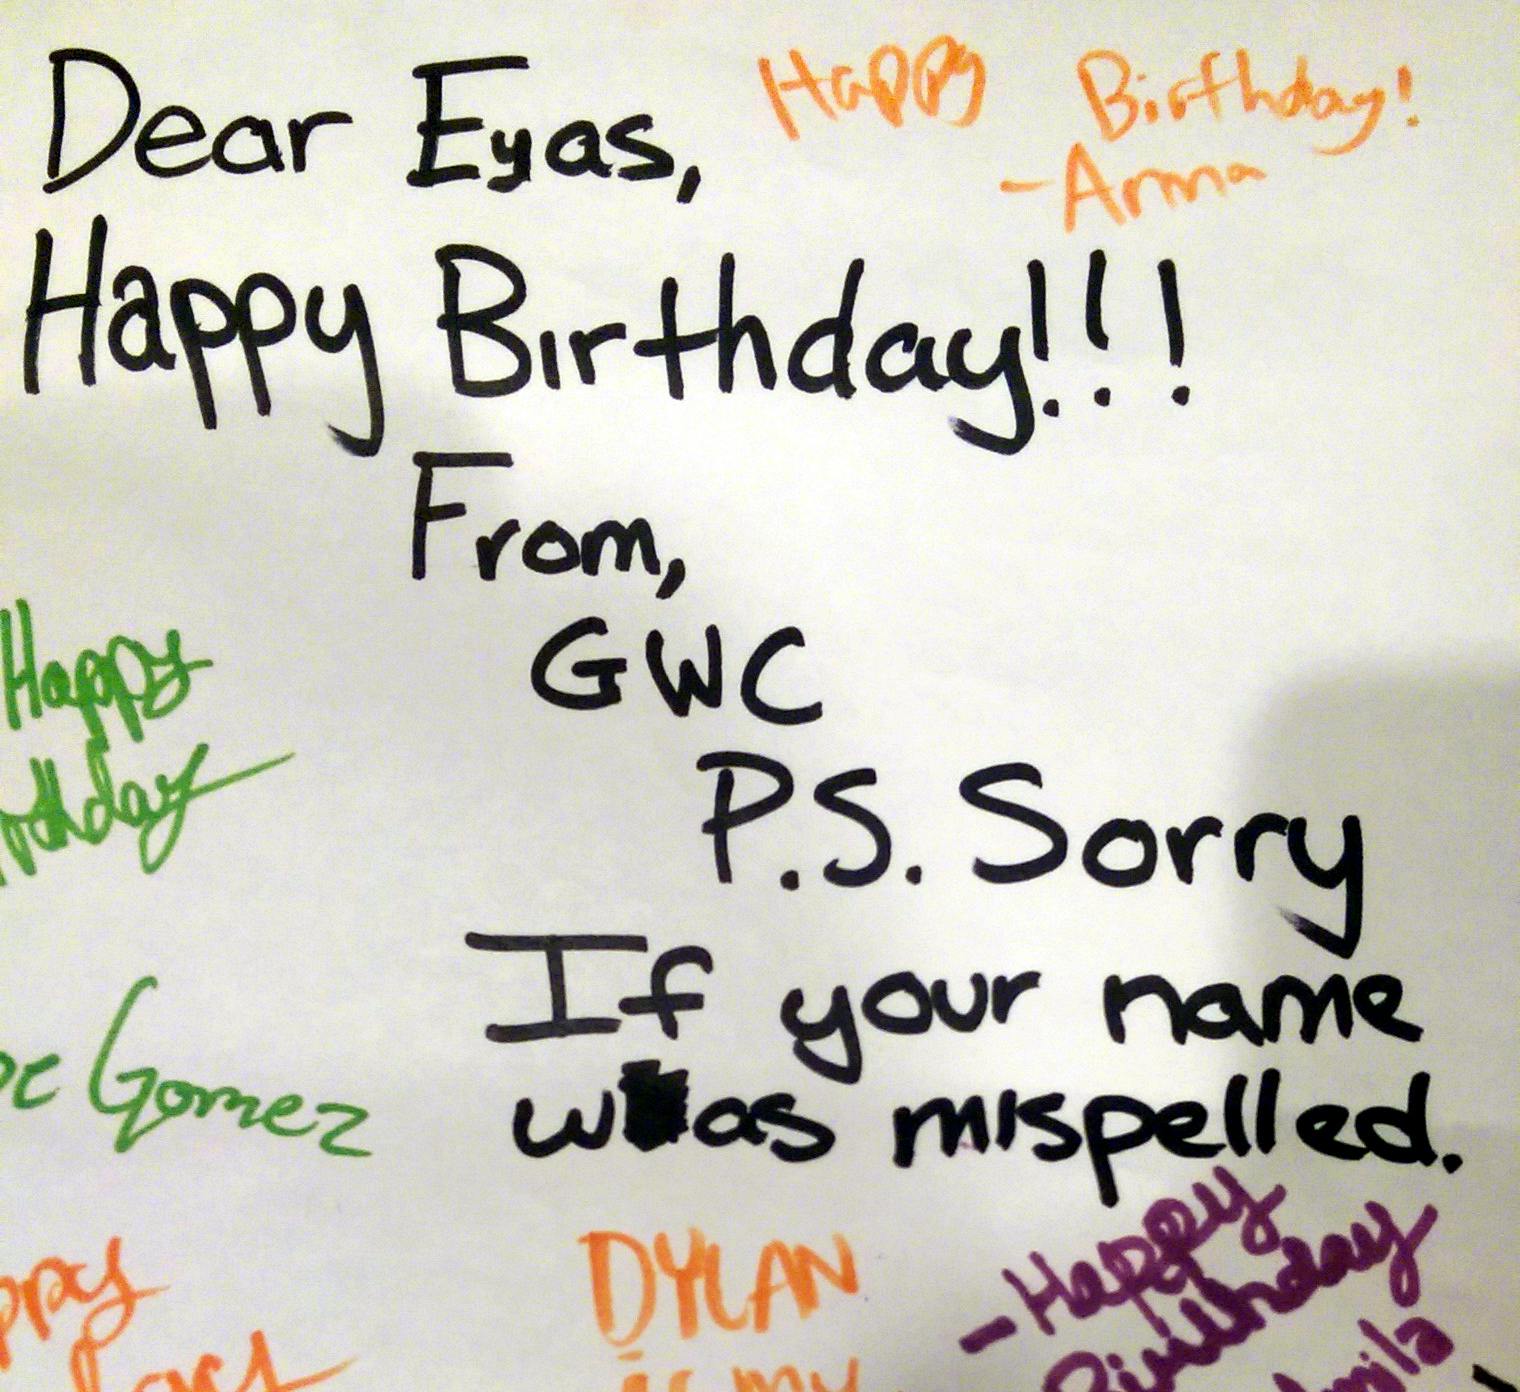 Dear Eyas, Happy Birthday! P.S. Sorry if your name was mispelled.